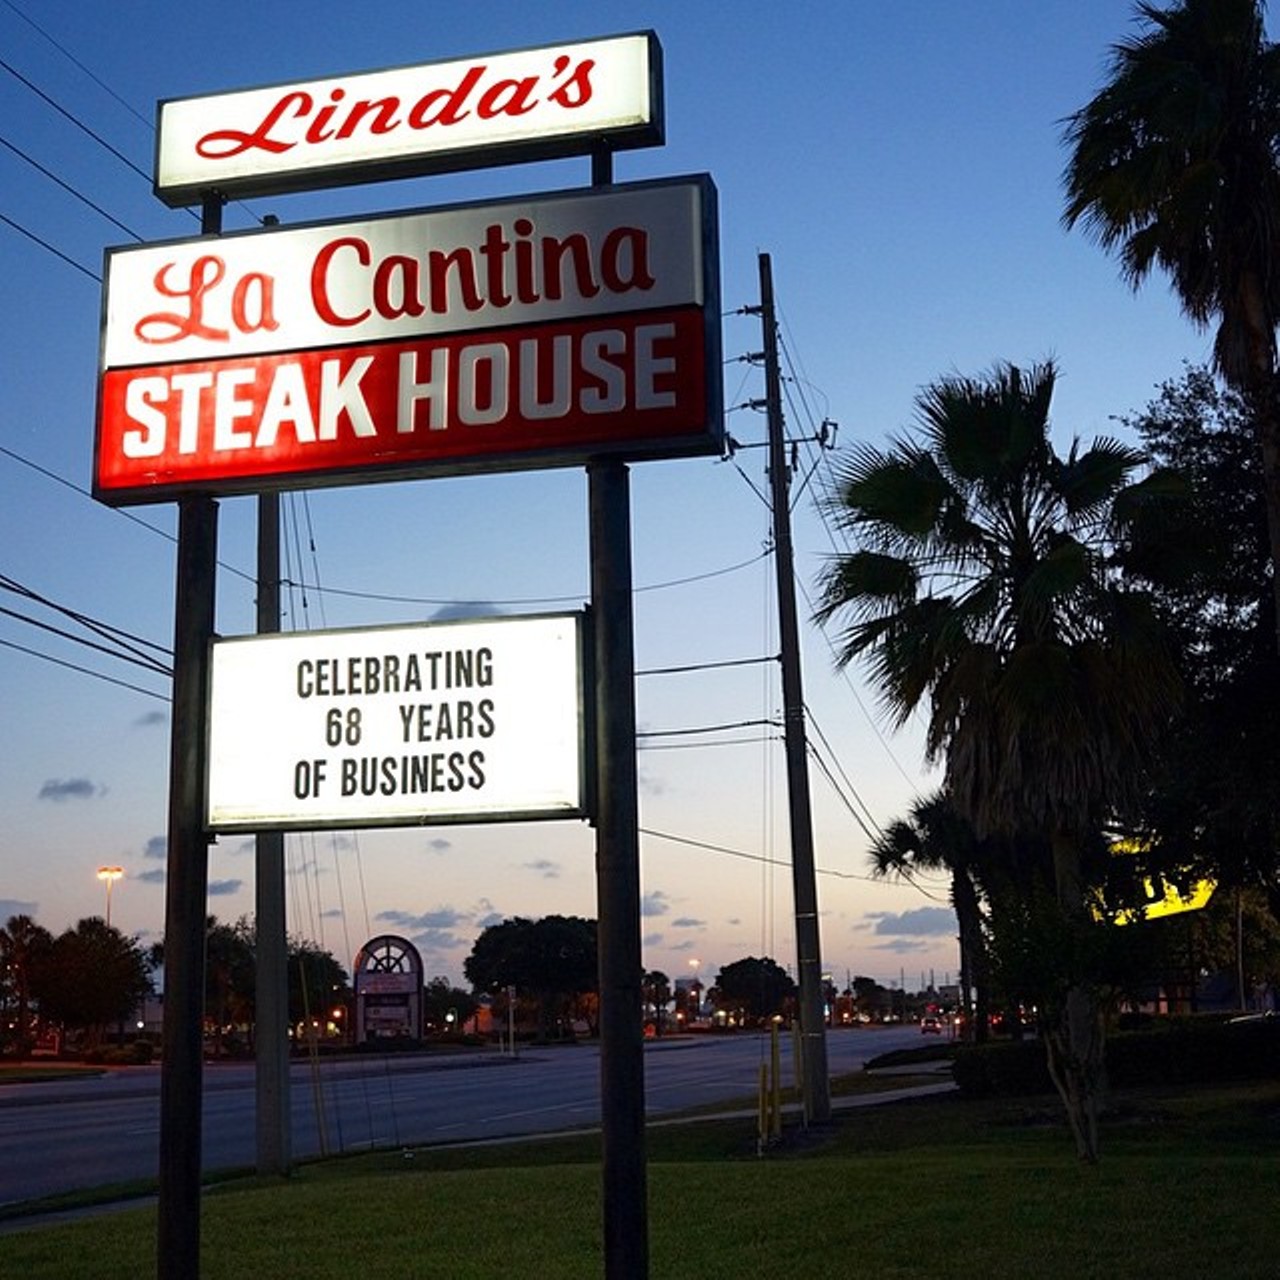 Linda&#146;s La Cantina
No matter how you slice it, Linda&#146;s La Cantina serves a superb steak and has been doing so for more than a half a century. Sit in the Fire Fountain Lounge sipping a grasshopper while you&#146;re waiting for your checked-tablecloth table in the dining room &#150; and keep in mind that on most nights, reservations are recommended. All steaks are cut in-house, including the monster 2-pound T-bone. 
4721 E. Colonial Drive, 407-894-4491; $$$
Photo via olivierlacan/Instagram